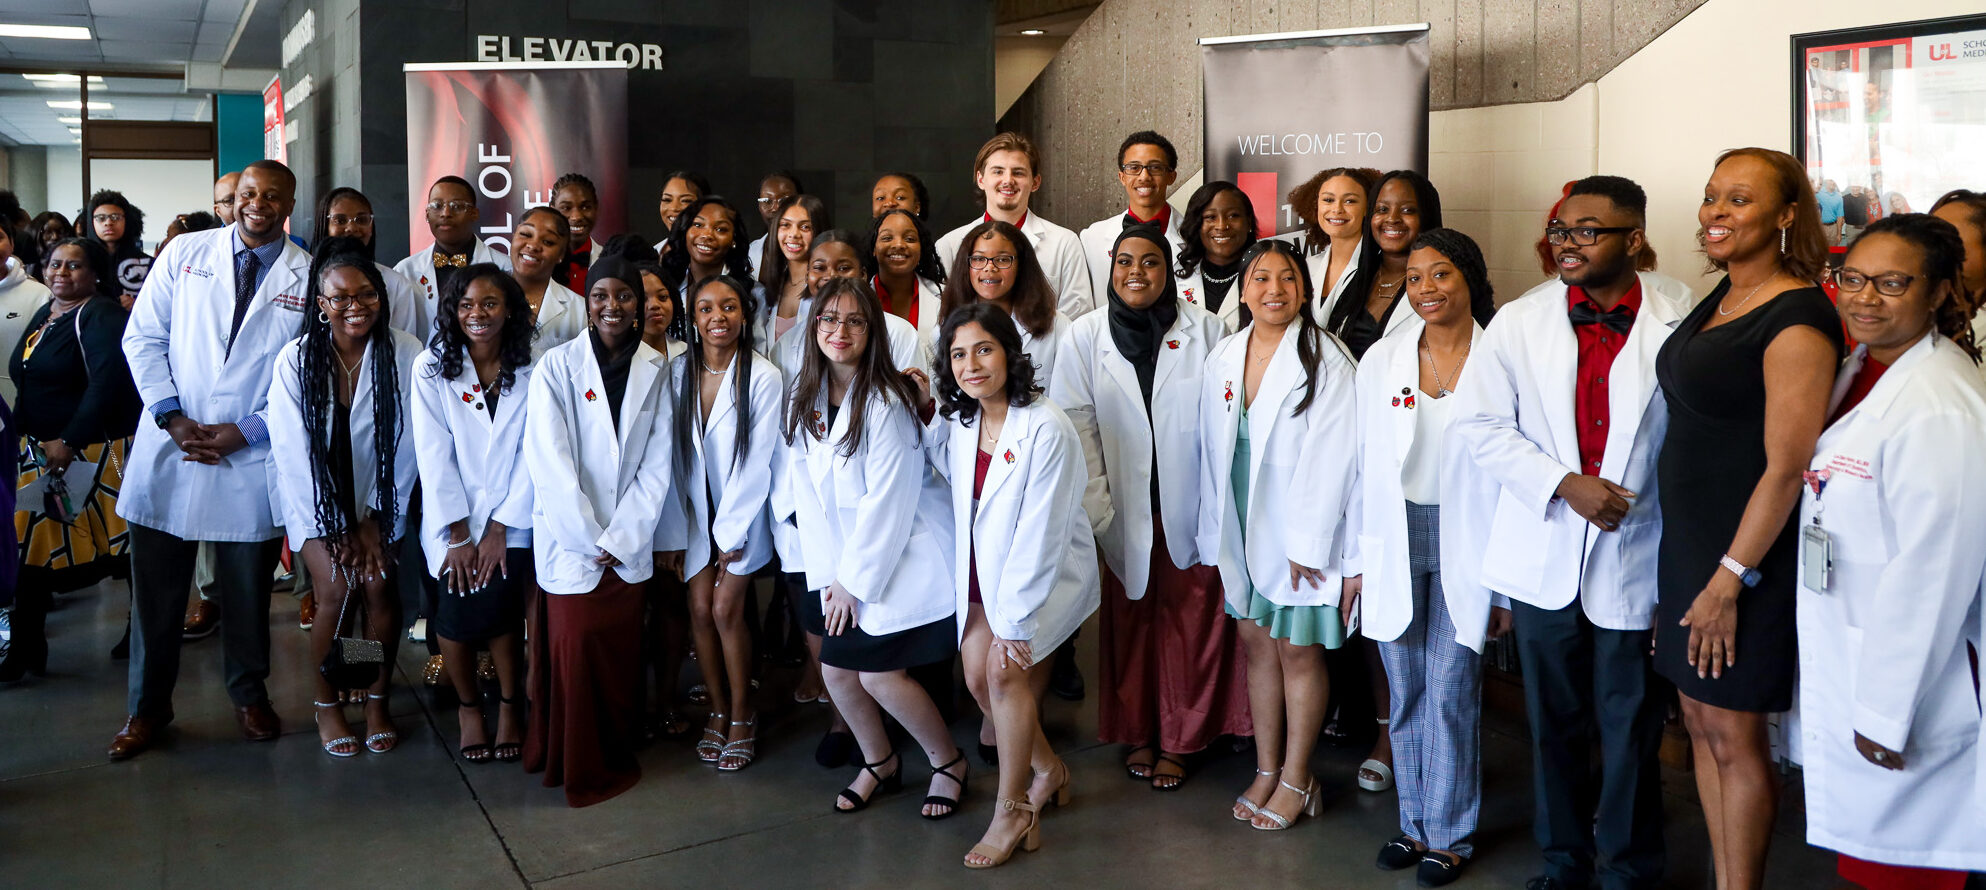 Group shot of the Central High School Pre-Medical Magnet Program members after receiving their white coats.